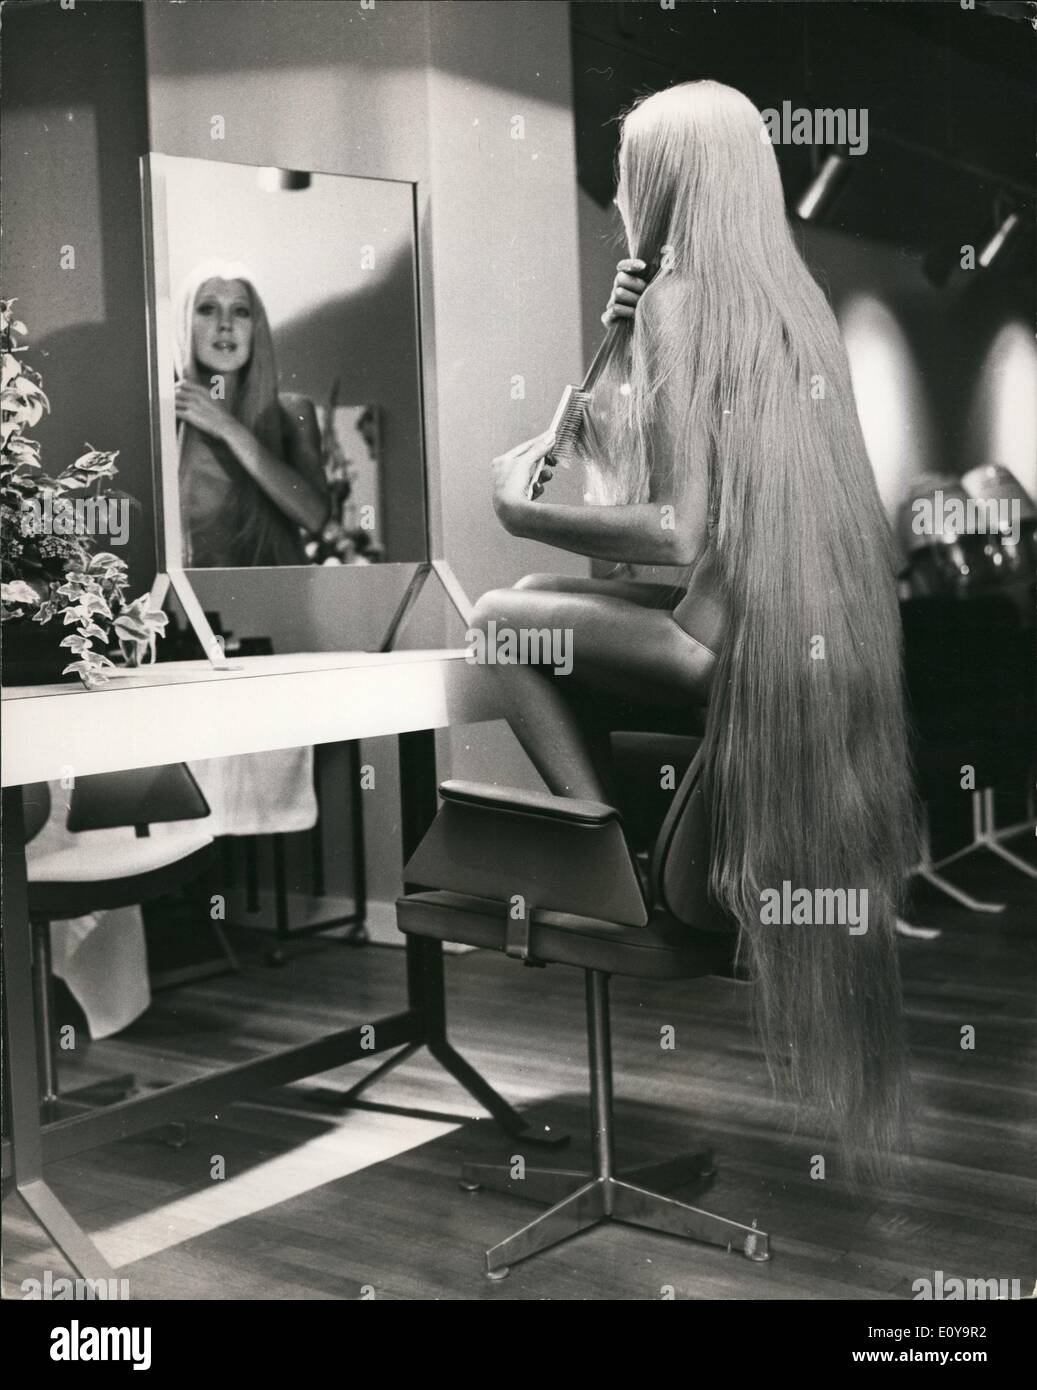 Sep. 09, 1969 - The longest wig in the world: Jon, Marc and Paul today opened their new hairdressing salon at 31, Bruton Street, at which a girl wearing the longest wig in the world the Godiva wig was present. Photo shows 19 year old Holly O'Neill, wearing the Godiva wig at the new salon today. Stock Photo